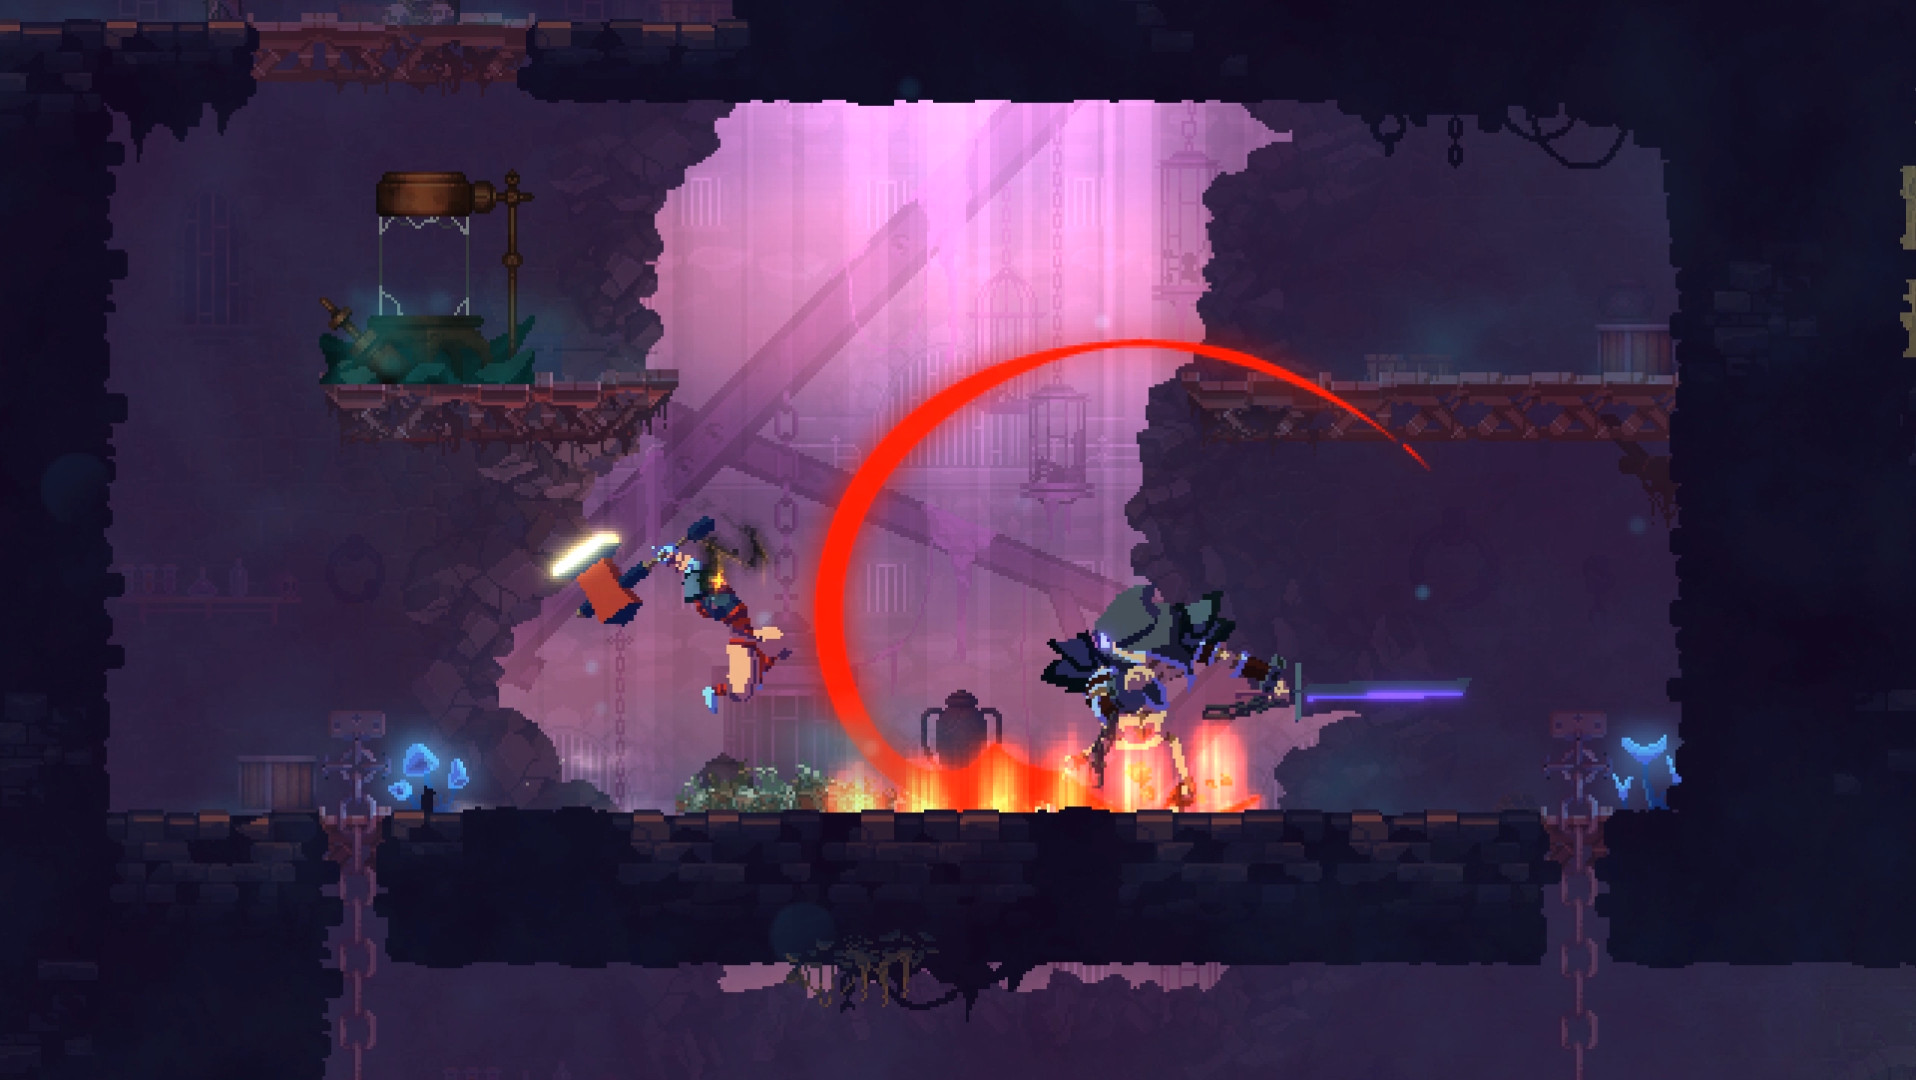 Dead Cells' protagonist swinging an axe against an undead opponent